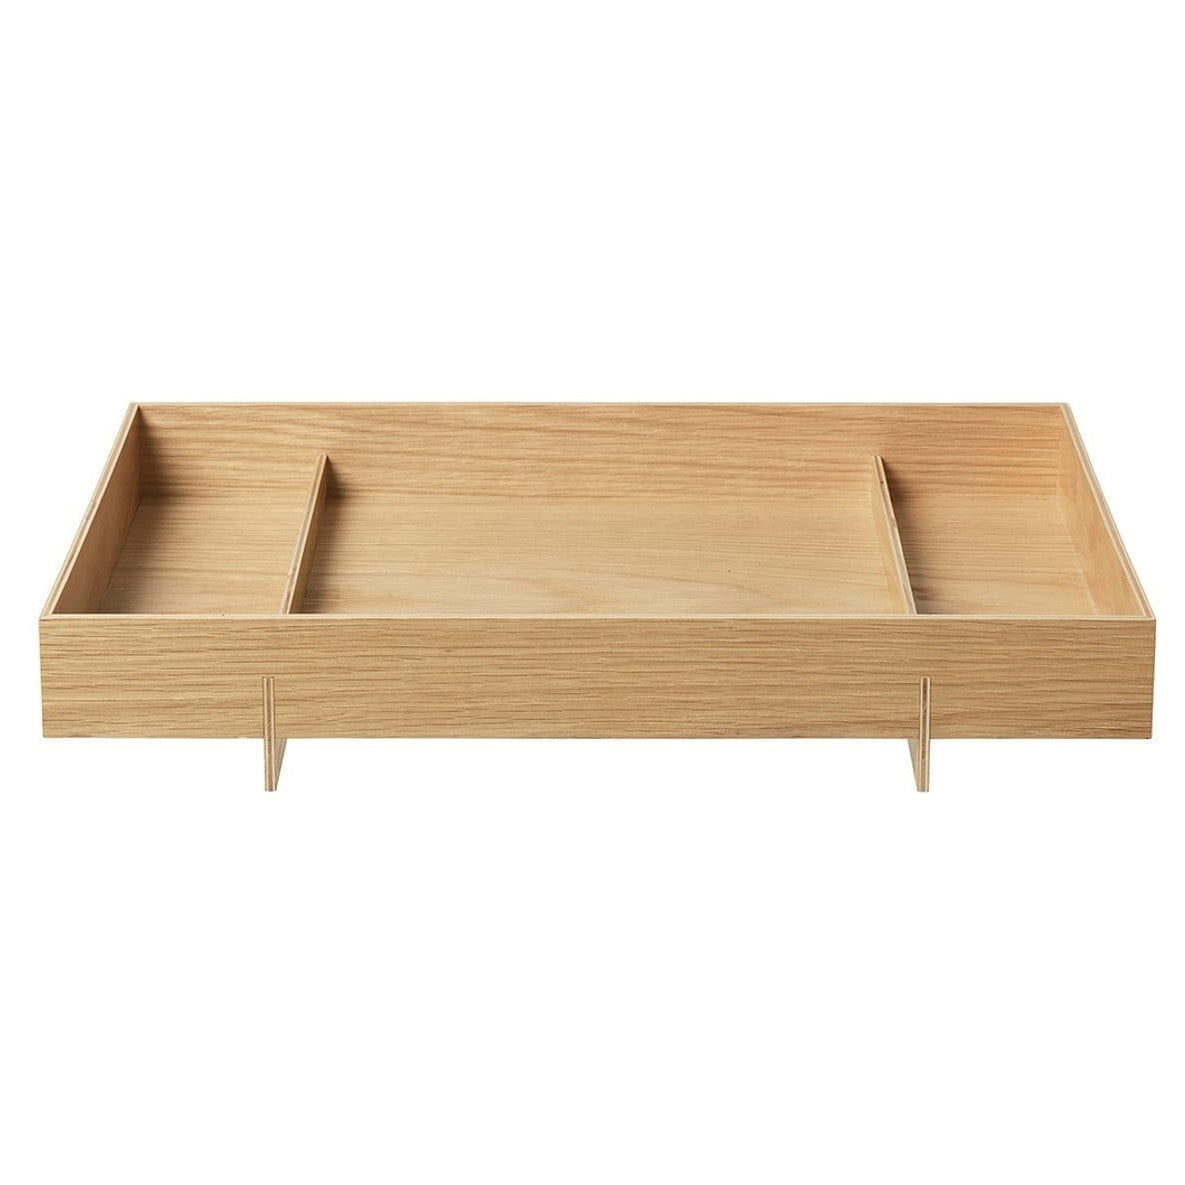 Blomus Sectioned Tray in Light Wood: Decorative & Functional ABENTO Large